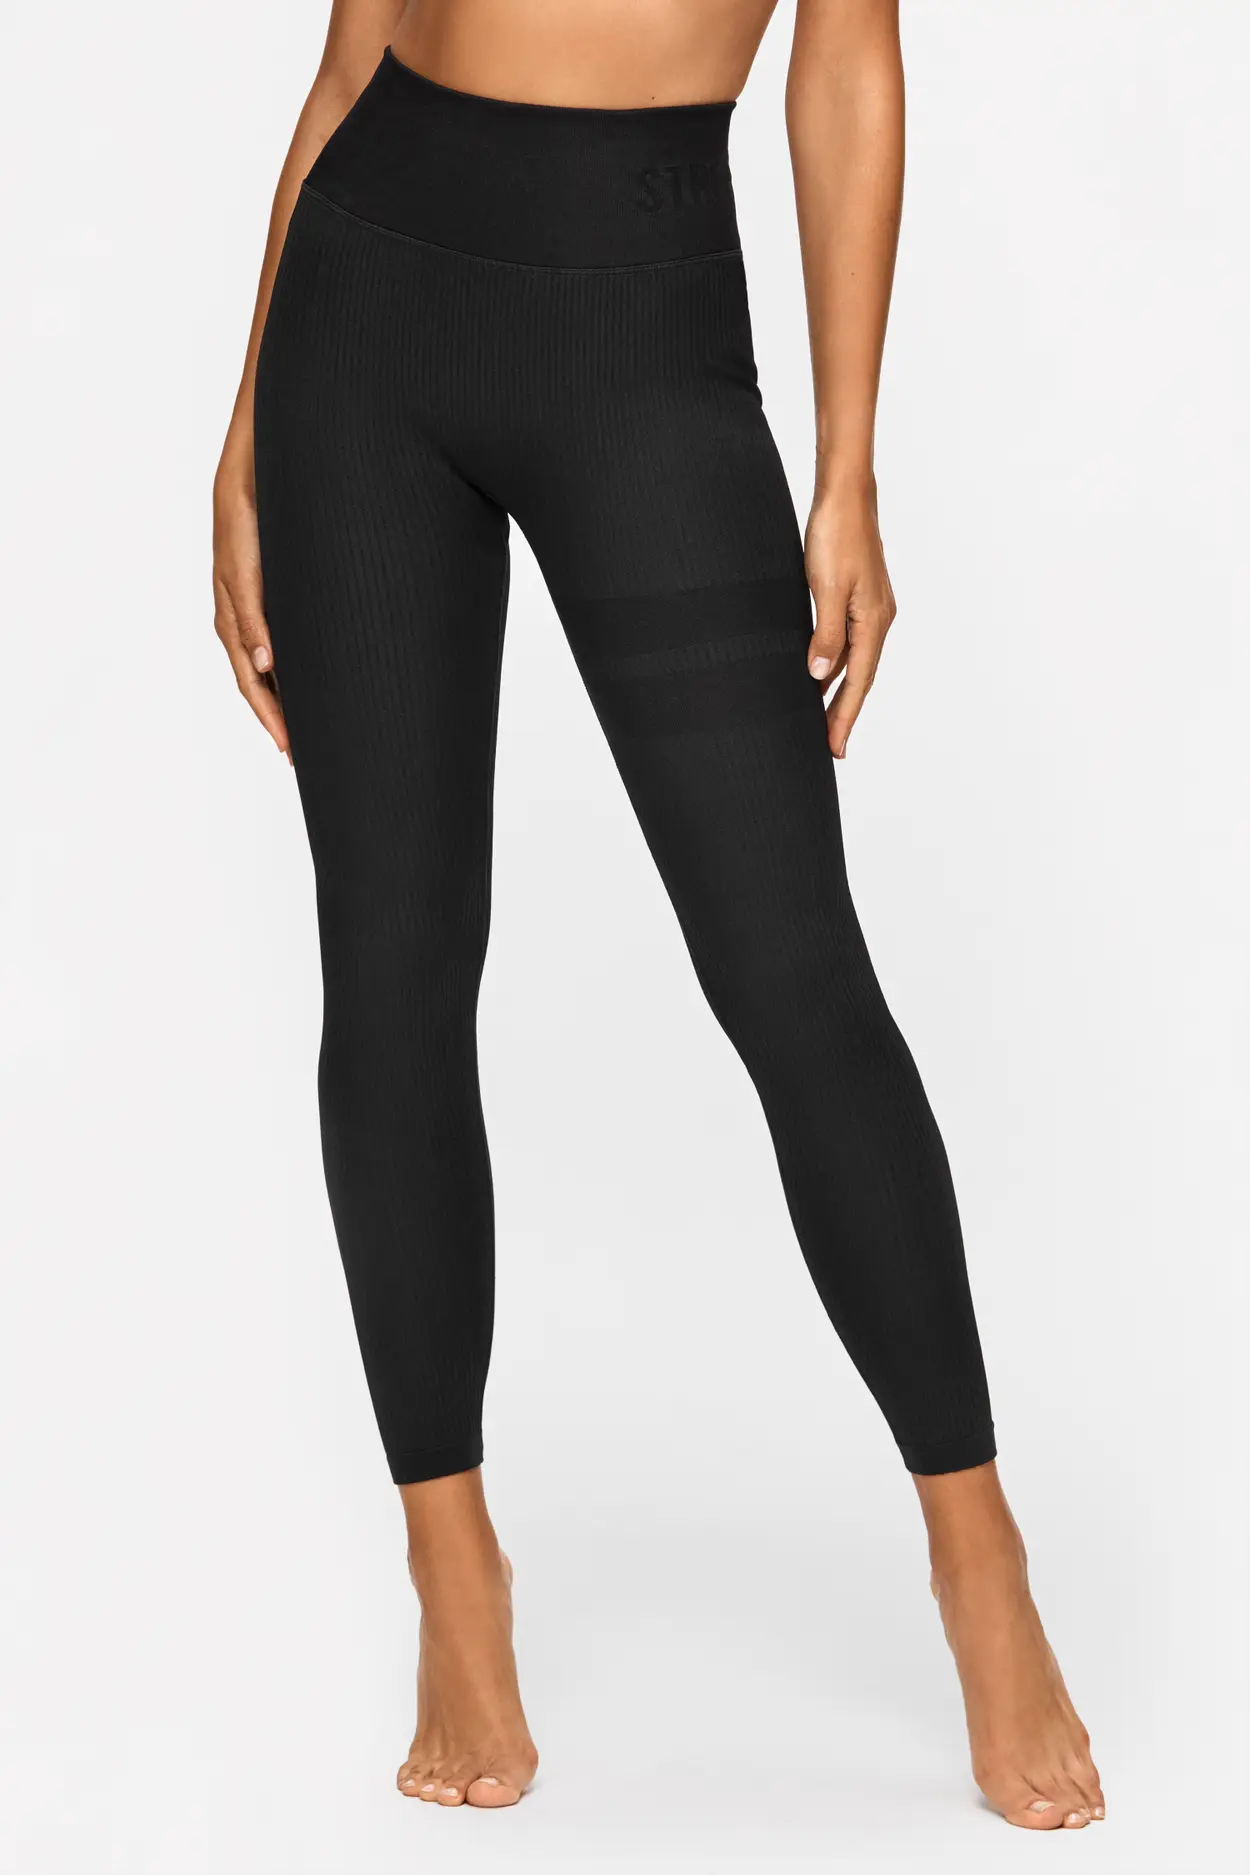 Slim Fit High waist Leggings with 20% discount!